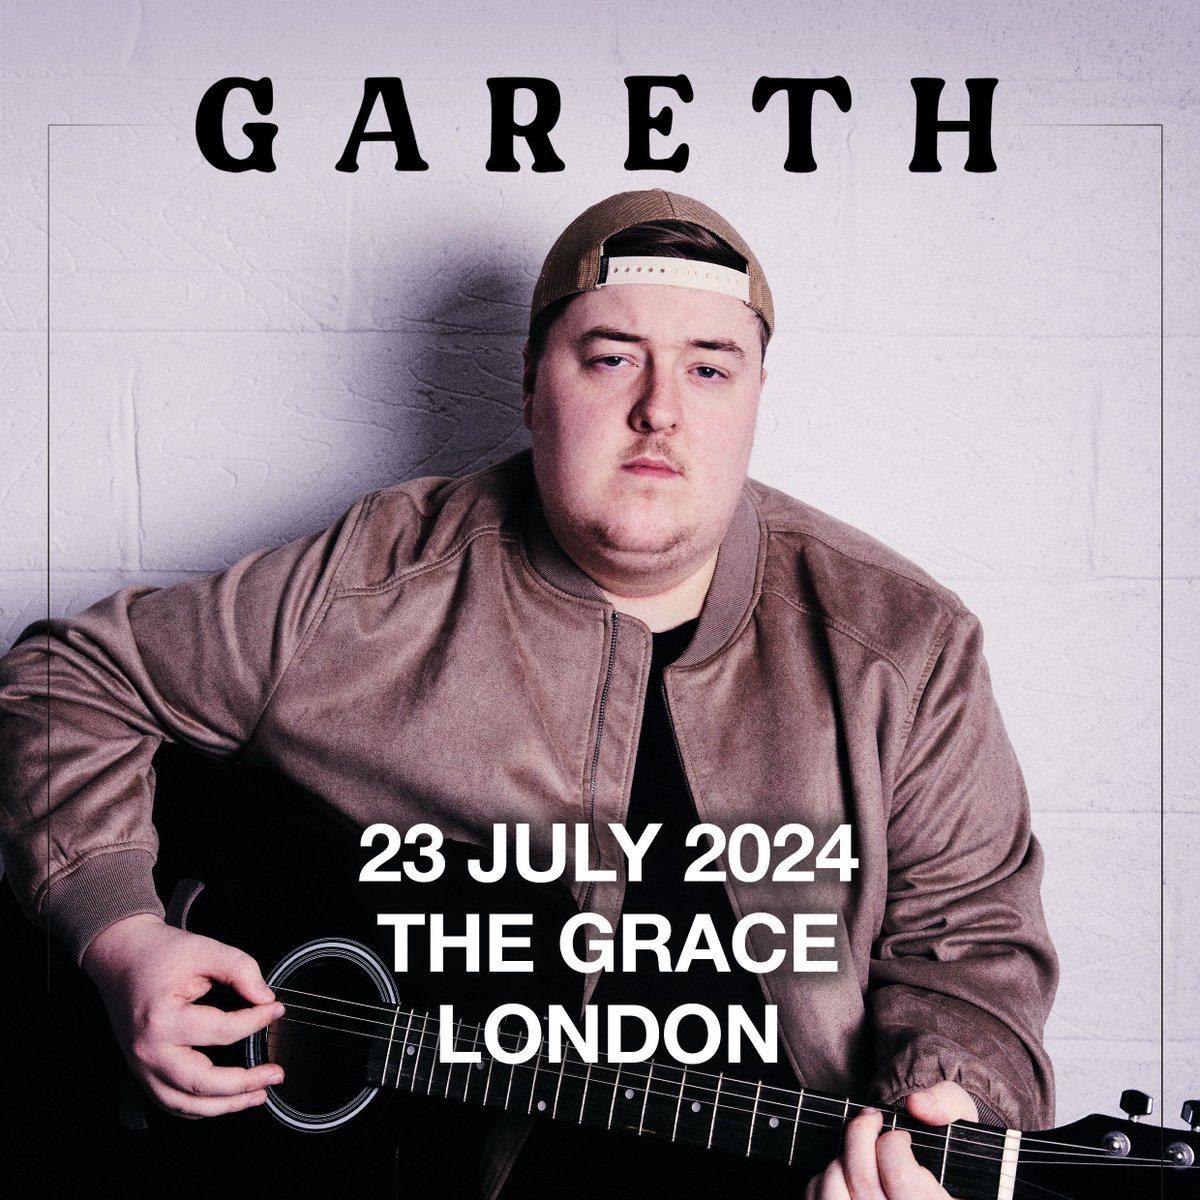 NEW // Gaining serious traction for blending his Irish roots with a love for country and storytelling @garethmusic1 is playing this July! 📅 Tuesday 23 July 2024 🎟️ Tickets on sale Wednesday, 10am.